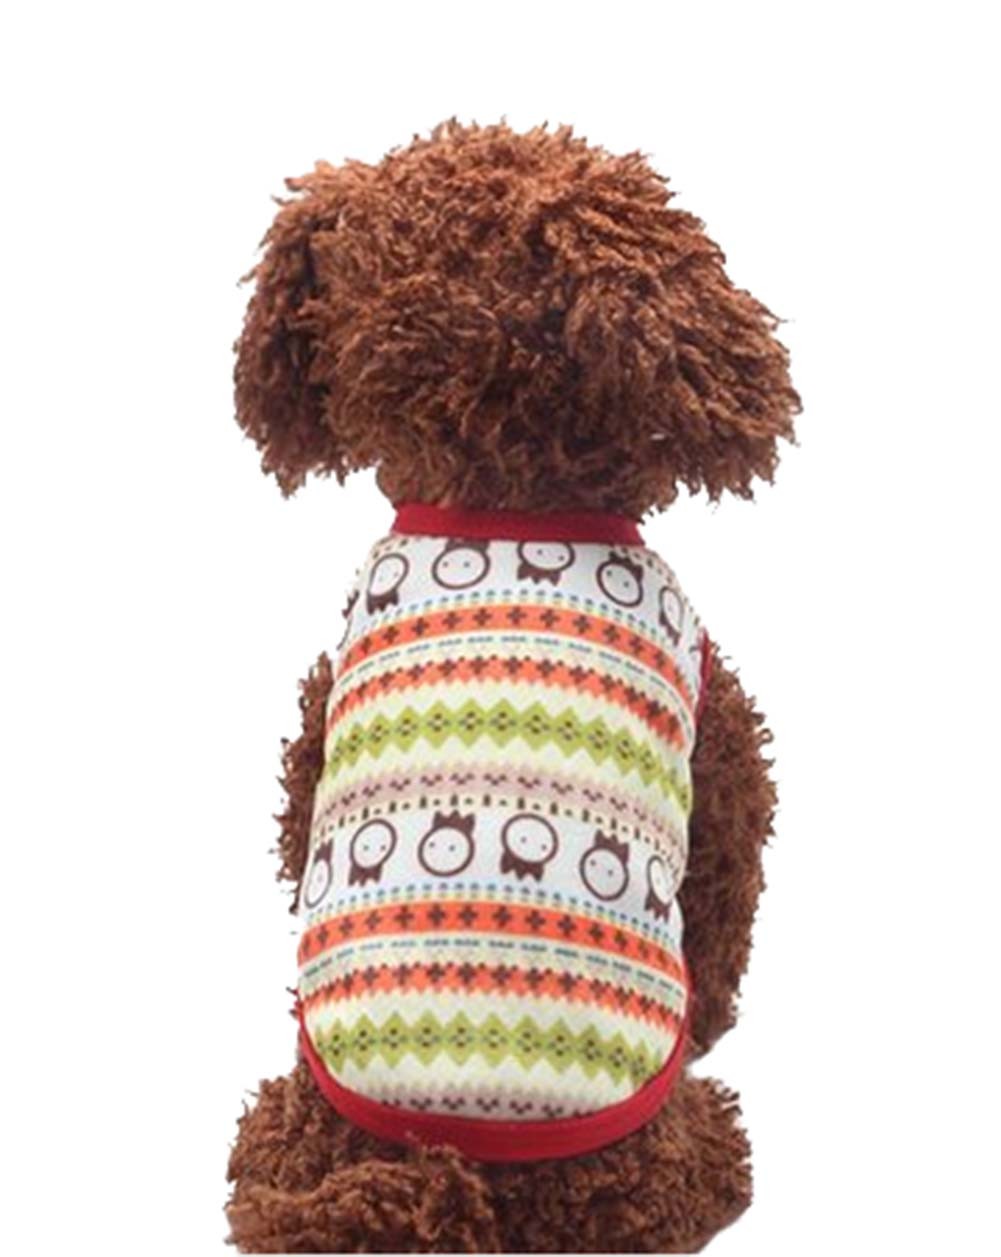 Cute Dog Clothes Fall And Winter Clothes Sweater Vest, Orange